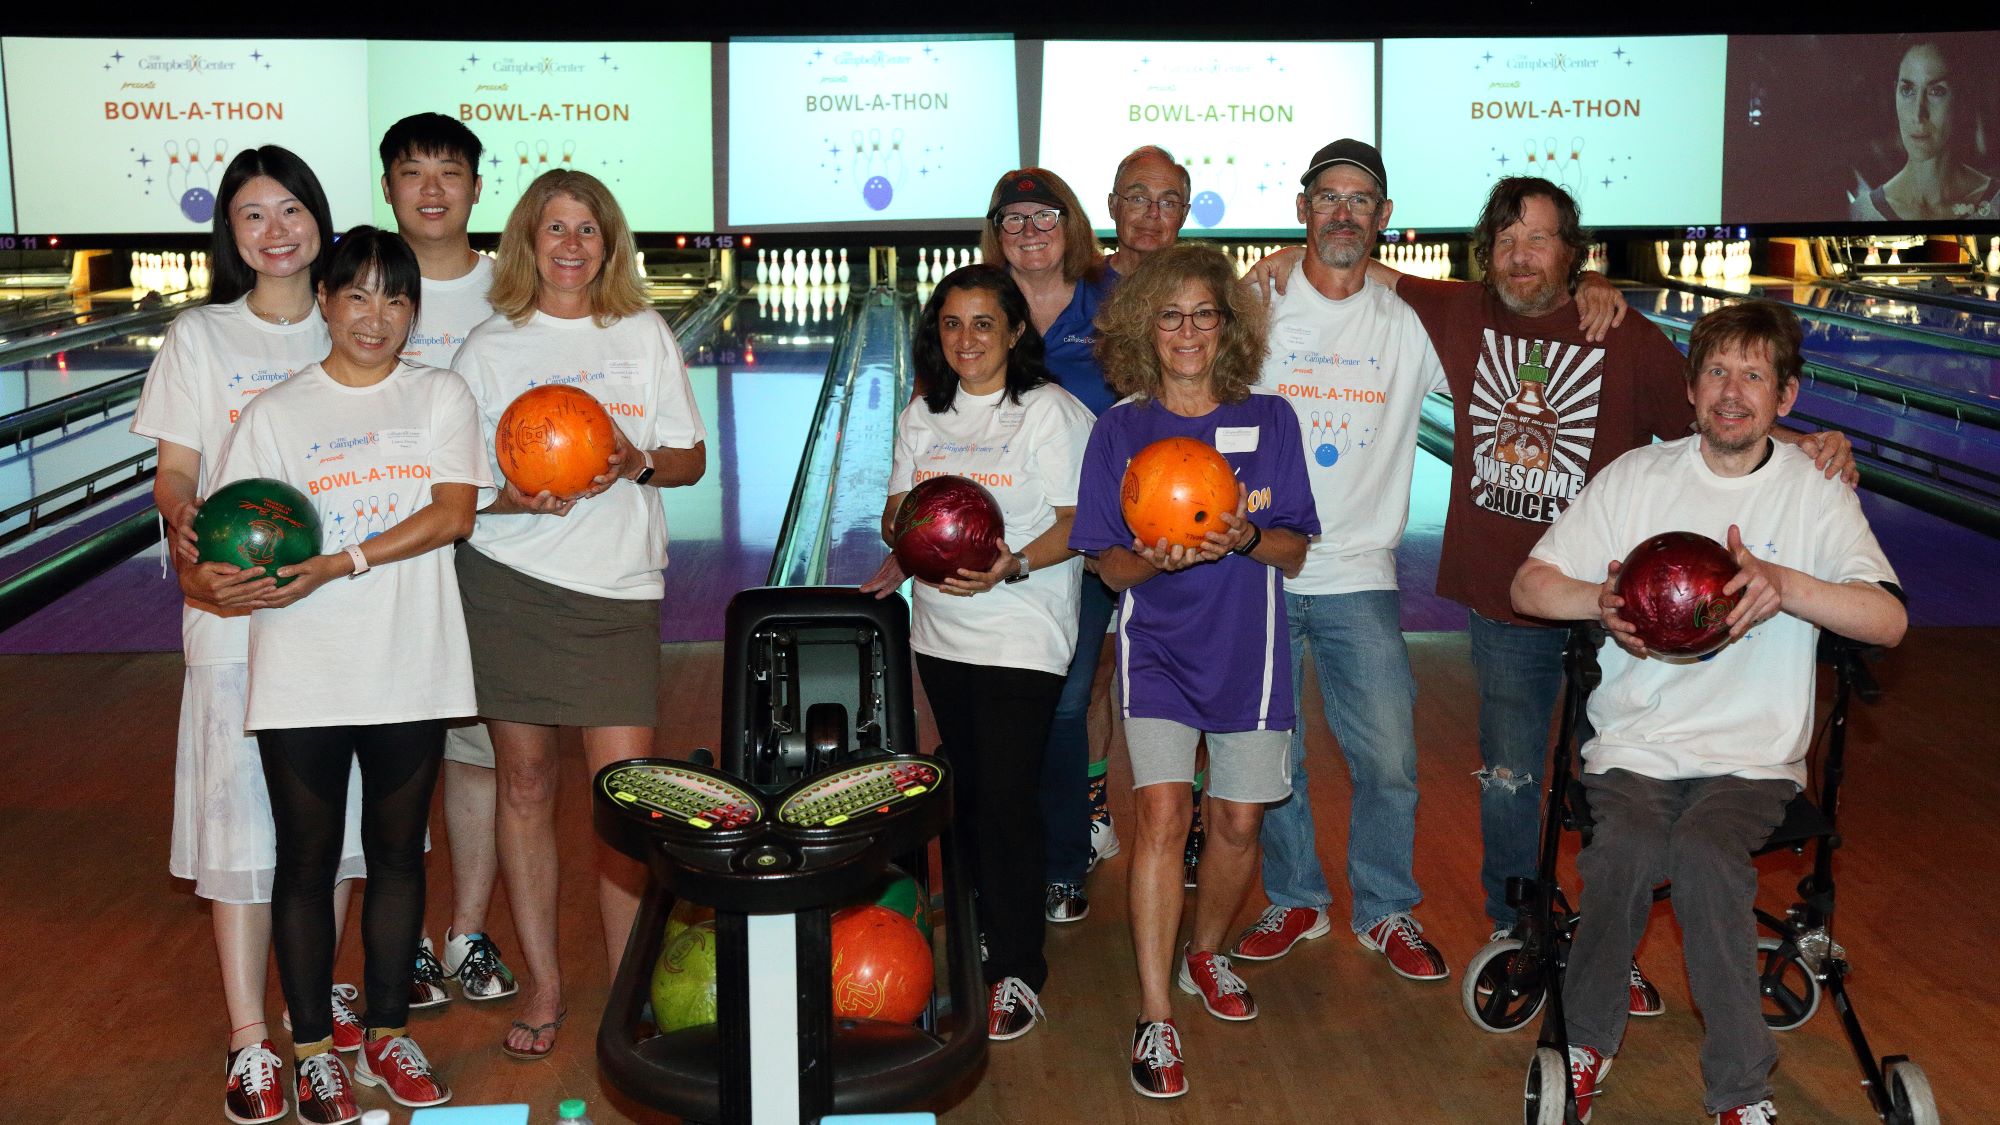 Group photo of bowlers in front of the lanes holding their bowling balls.